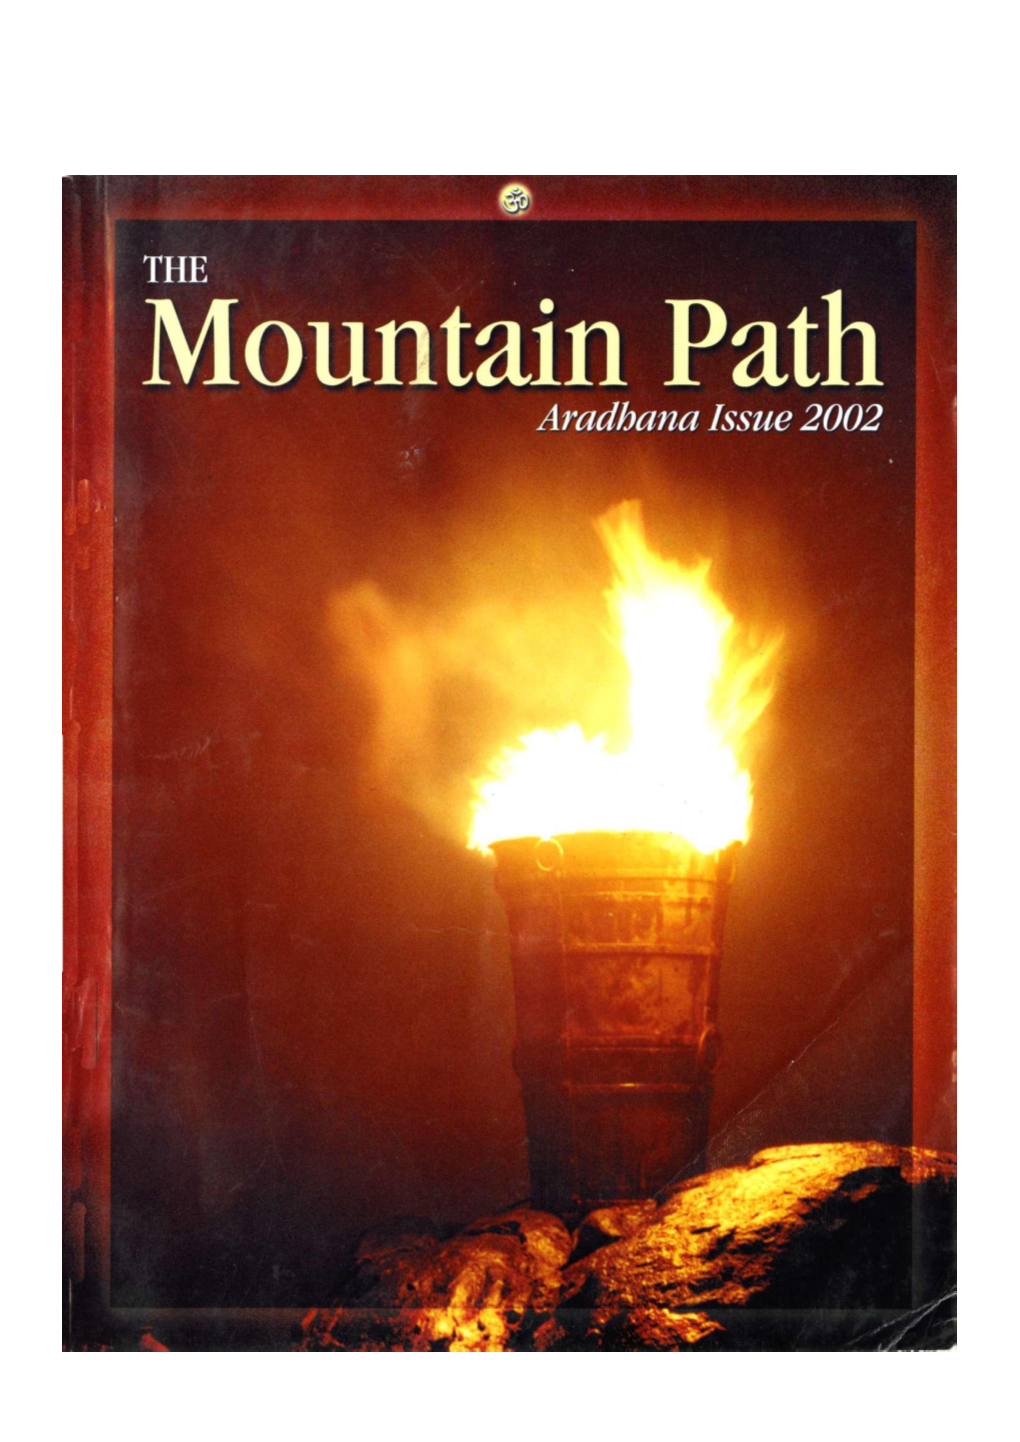 Mountain Path Aradhana Issue 2002 "Arunachala! Thou Dost Root out the Ego of Those Who Meditate on Thee in the Heart, Oh Arunachala!"